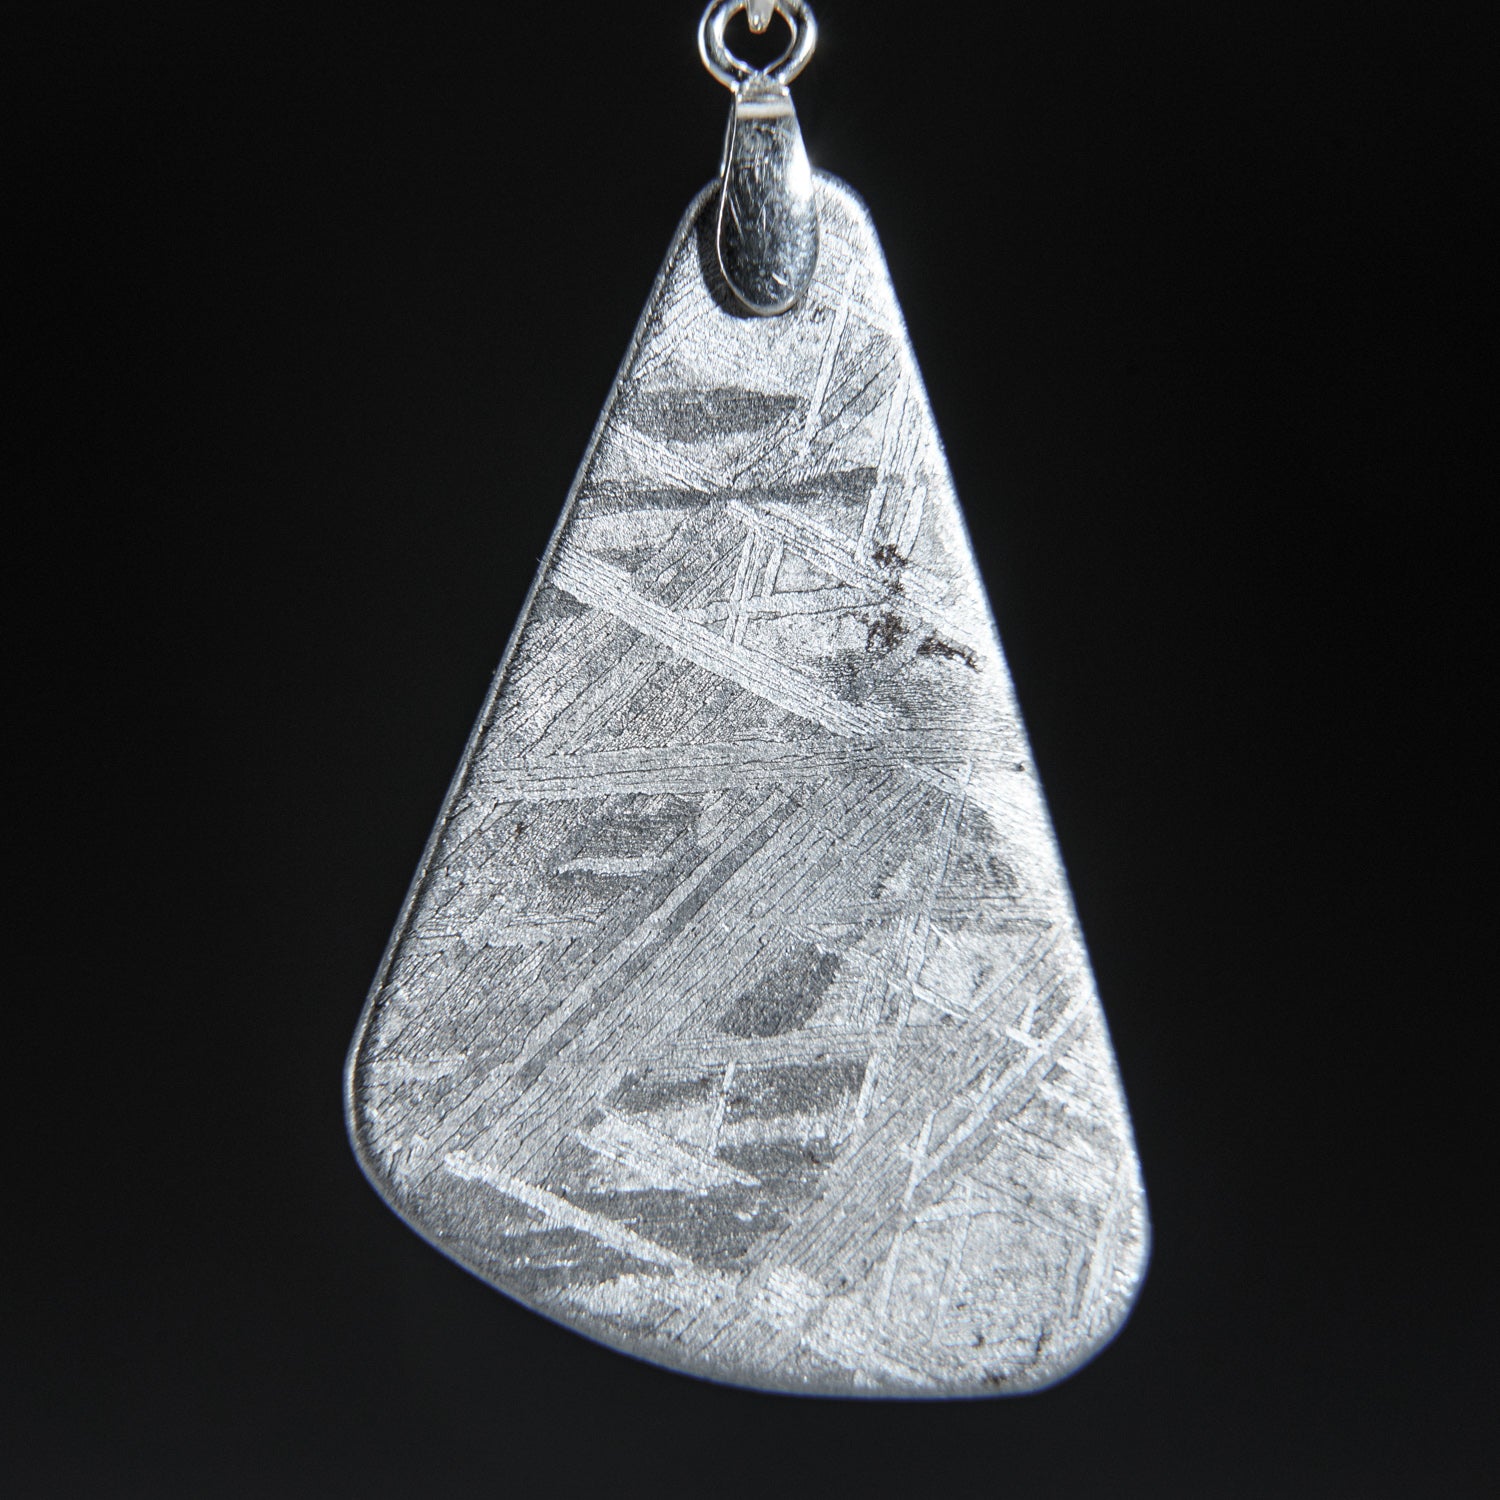 Polished Seymchan Meteorite pendant (7.1 grams) with 18" Sterling Silver Chain